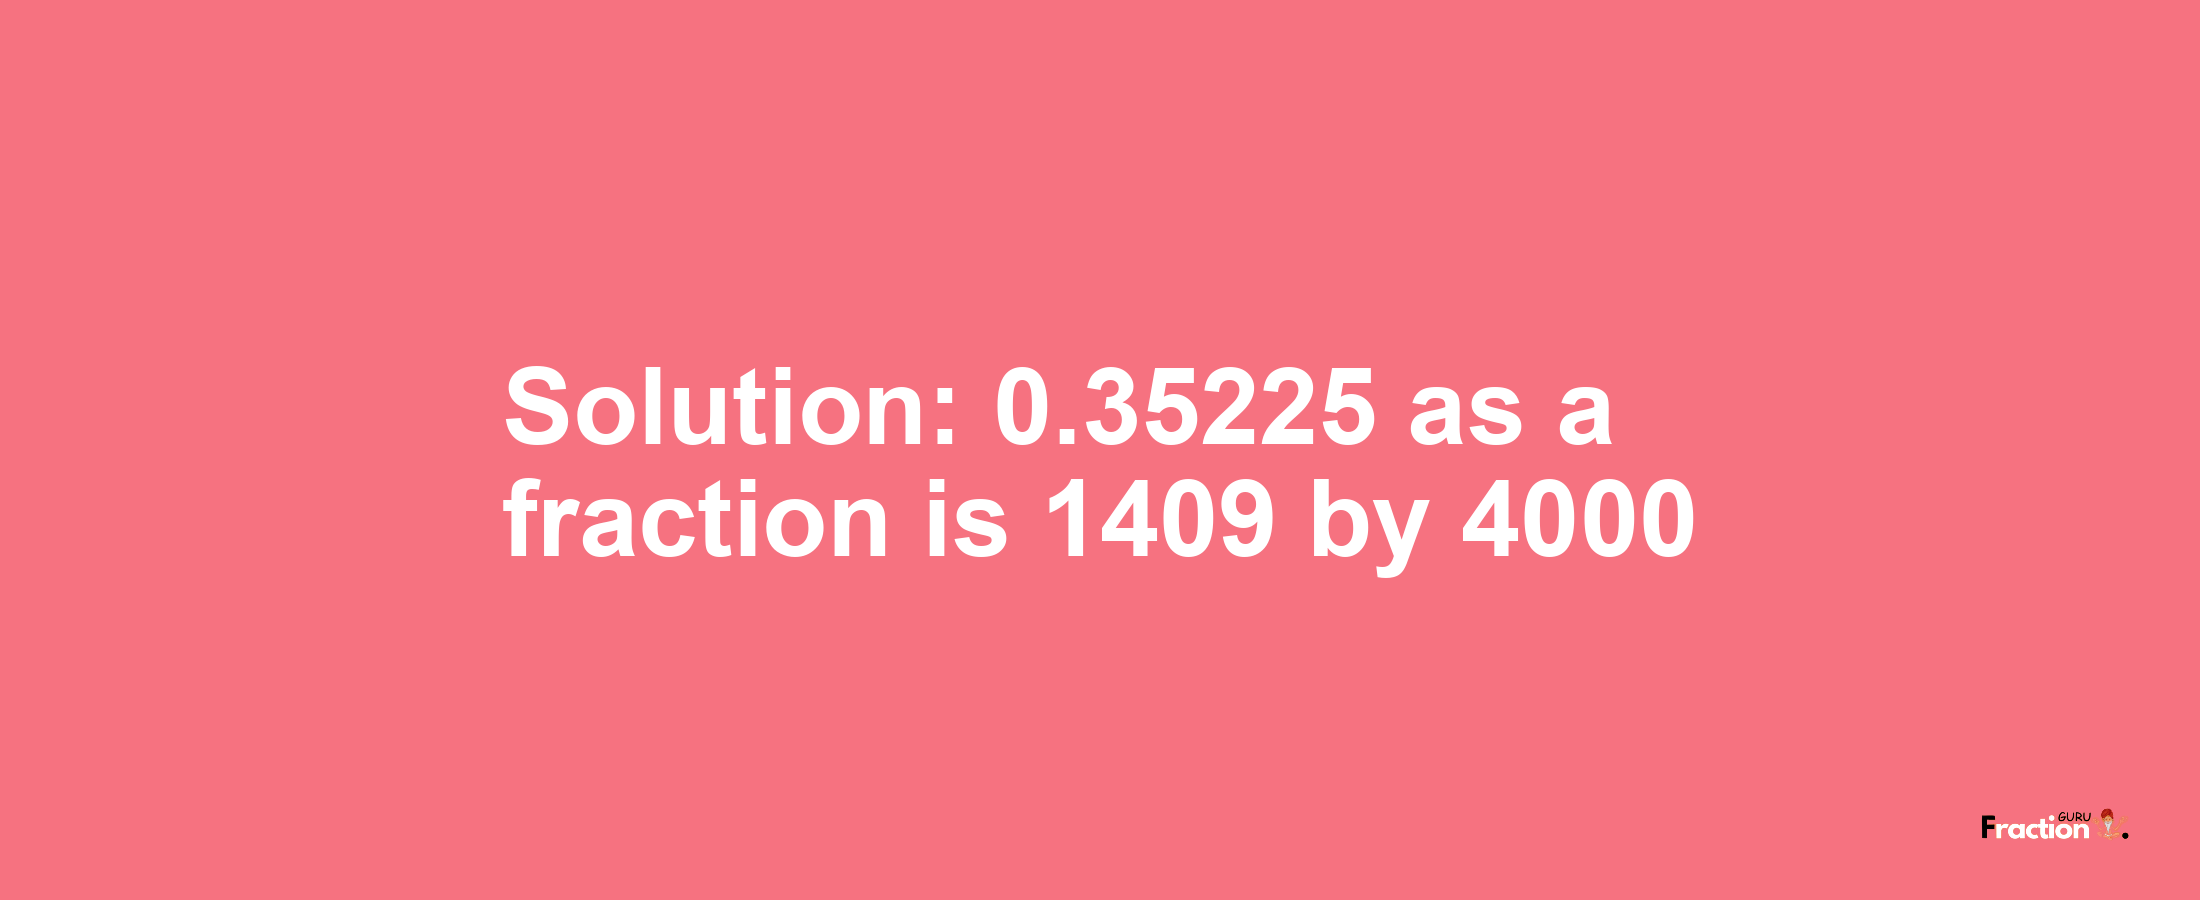 Solution:0.35225 as a fraction is 1409/4000